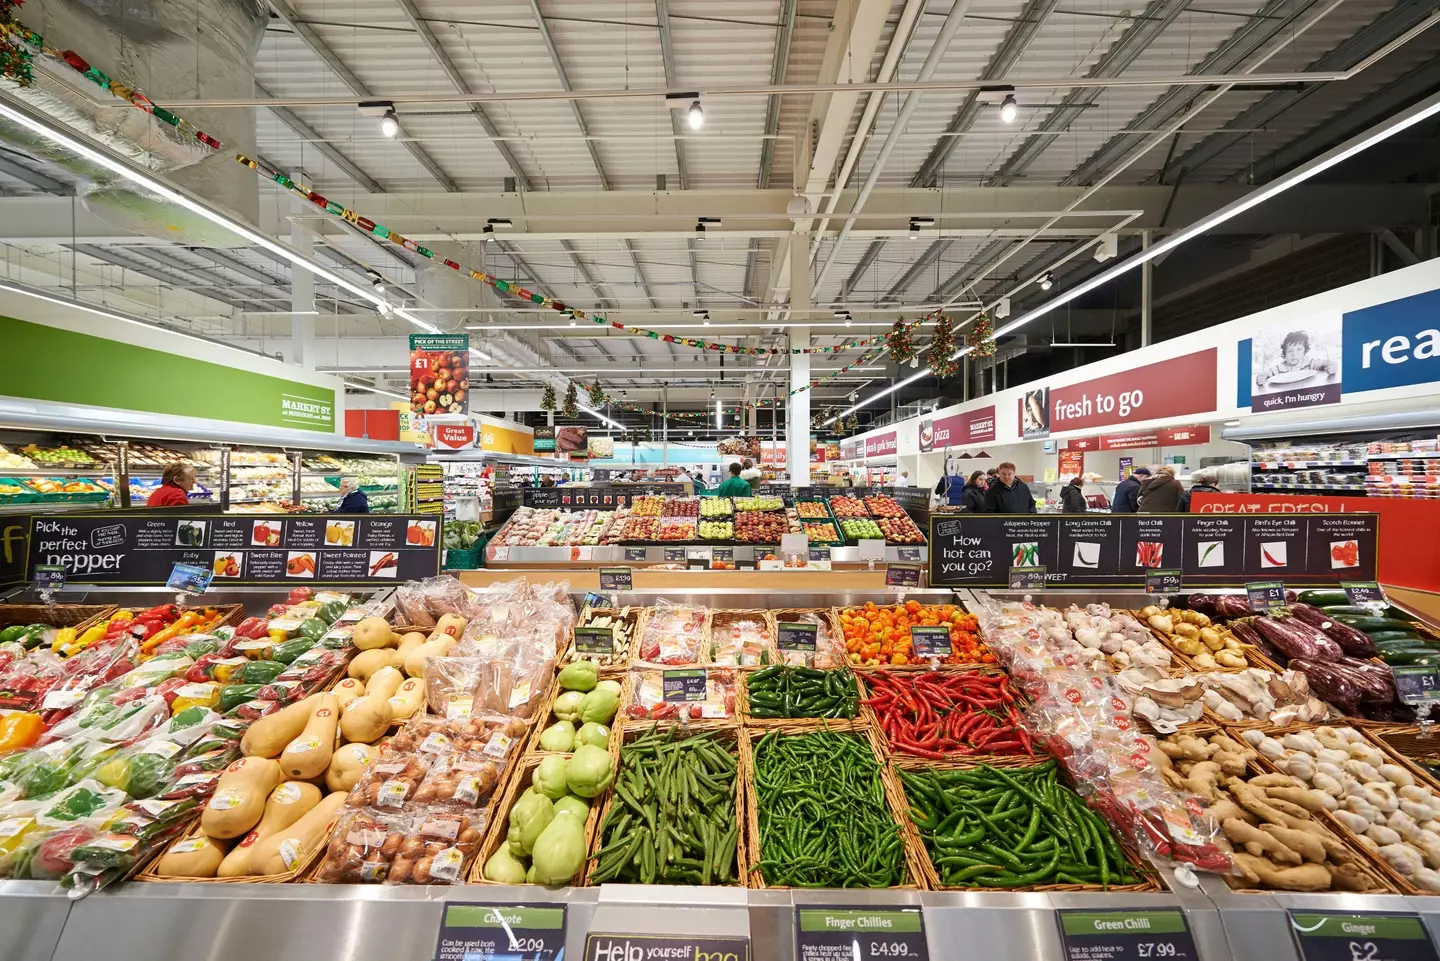 A 12-week consultation begins today into whether or not imperial measurements should be brought back into the UK's supermarkets.